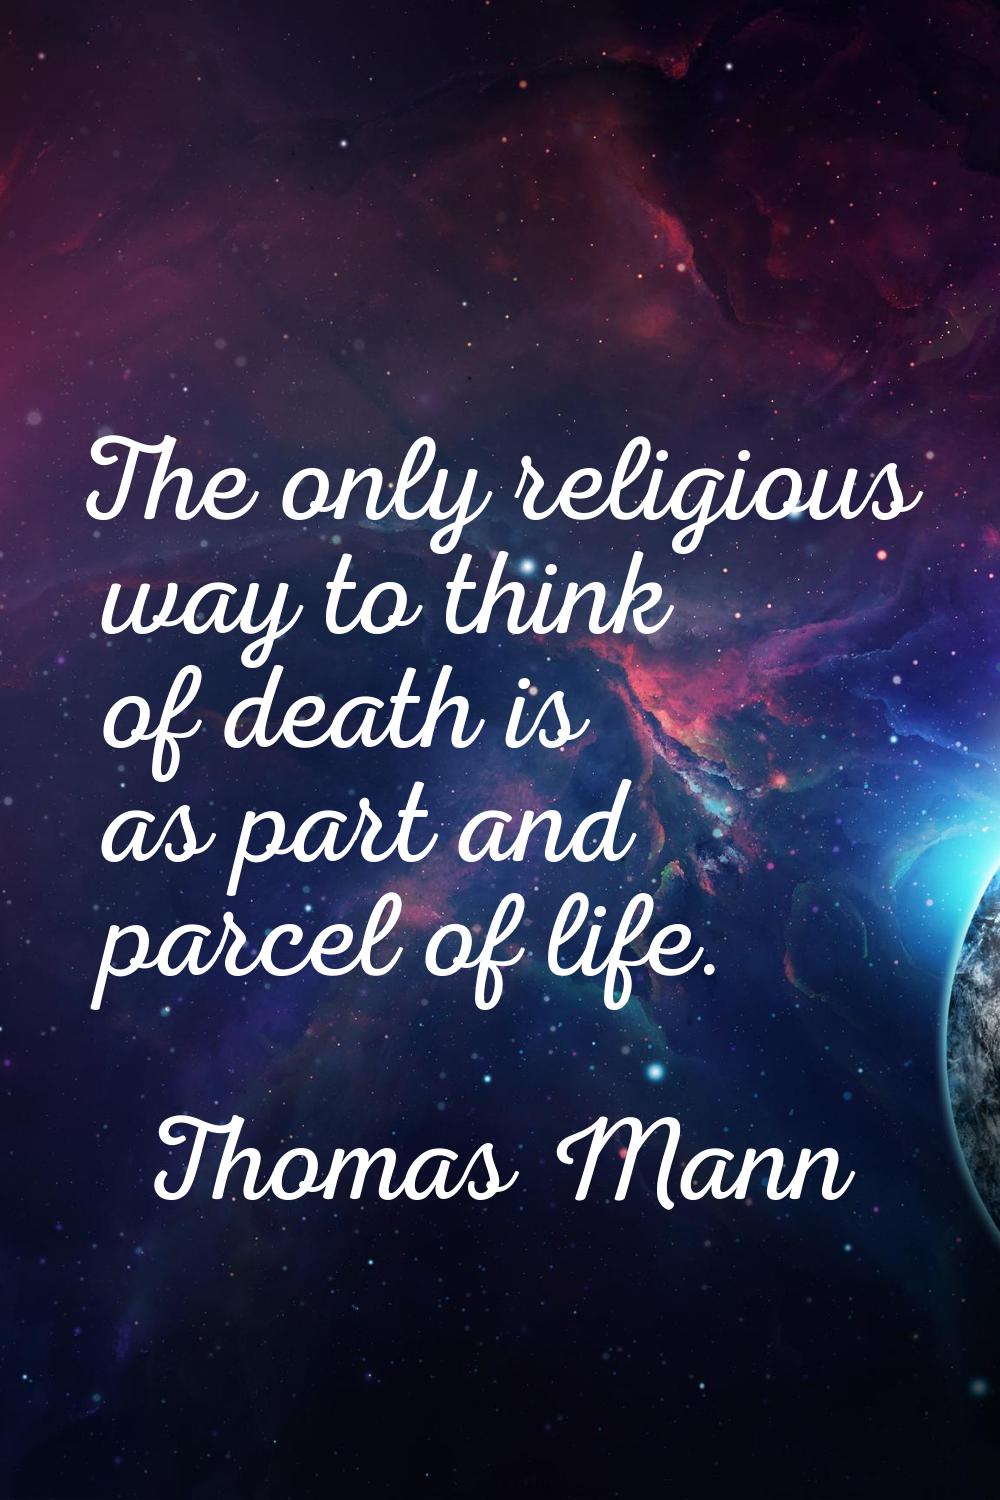 The only religious way to think of death is as part and parcel of life.